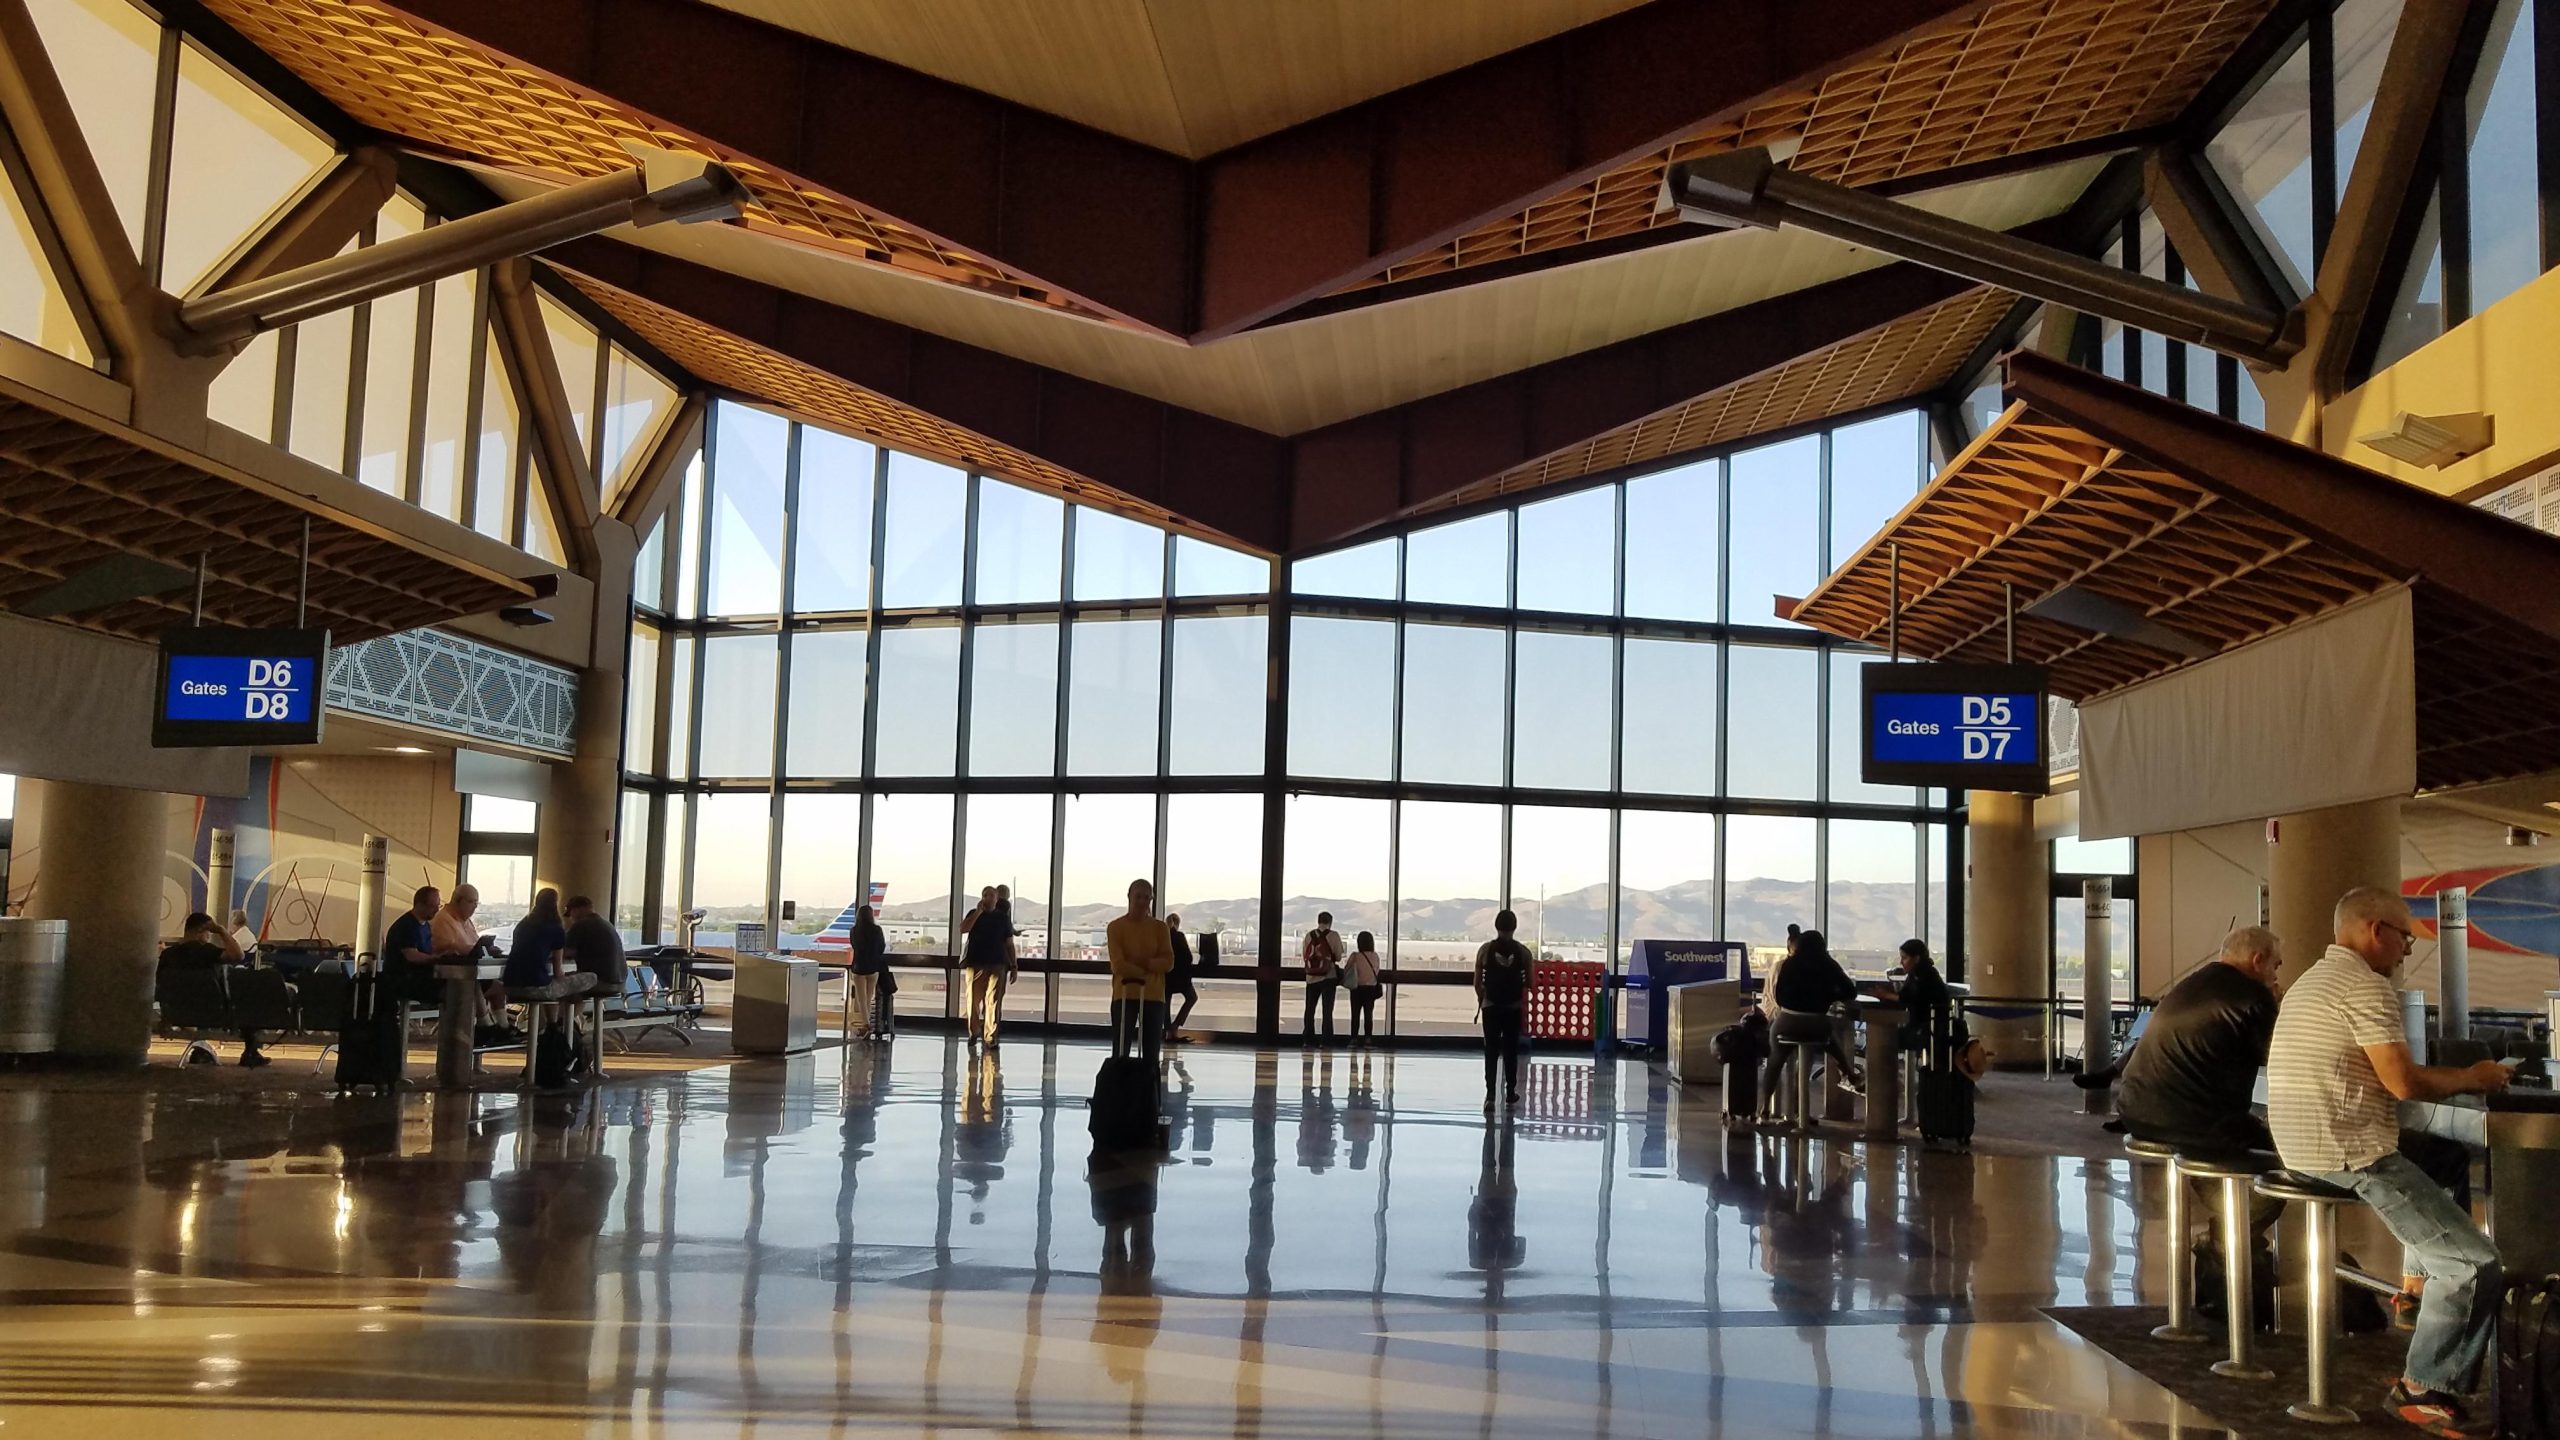 Phoenix Airport inaugurates new concourse after investment of $310 million dollars